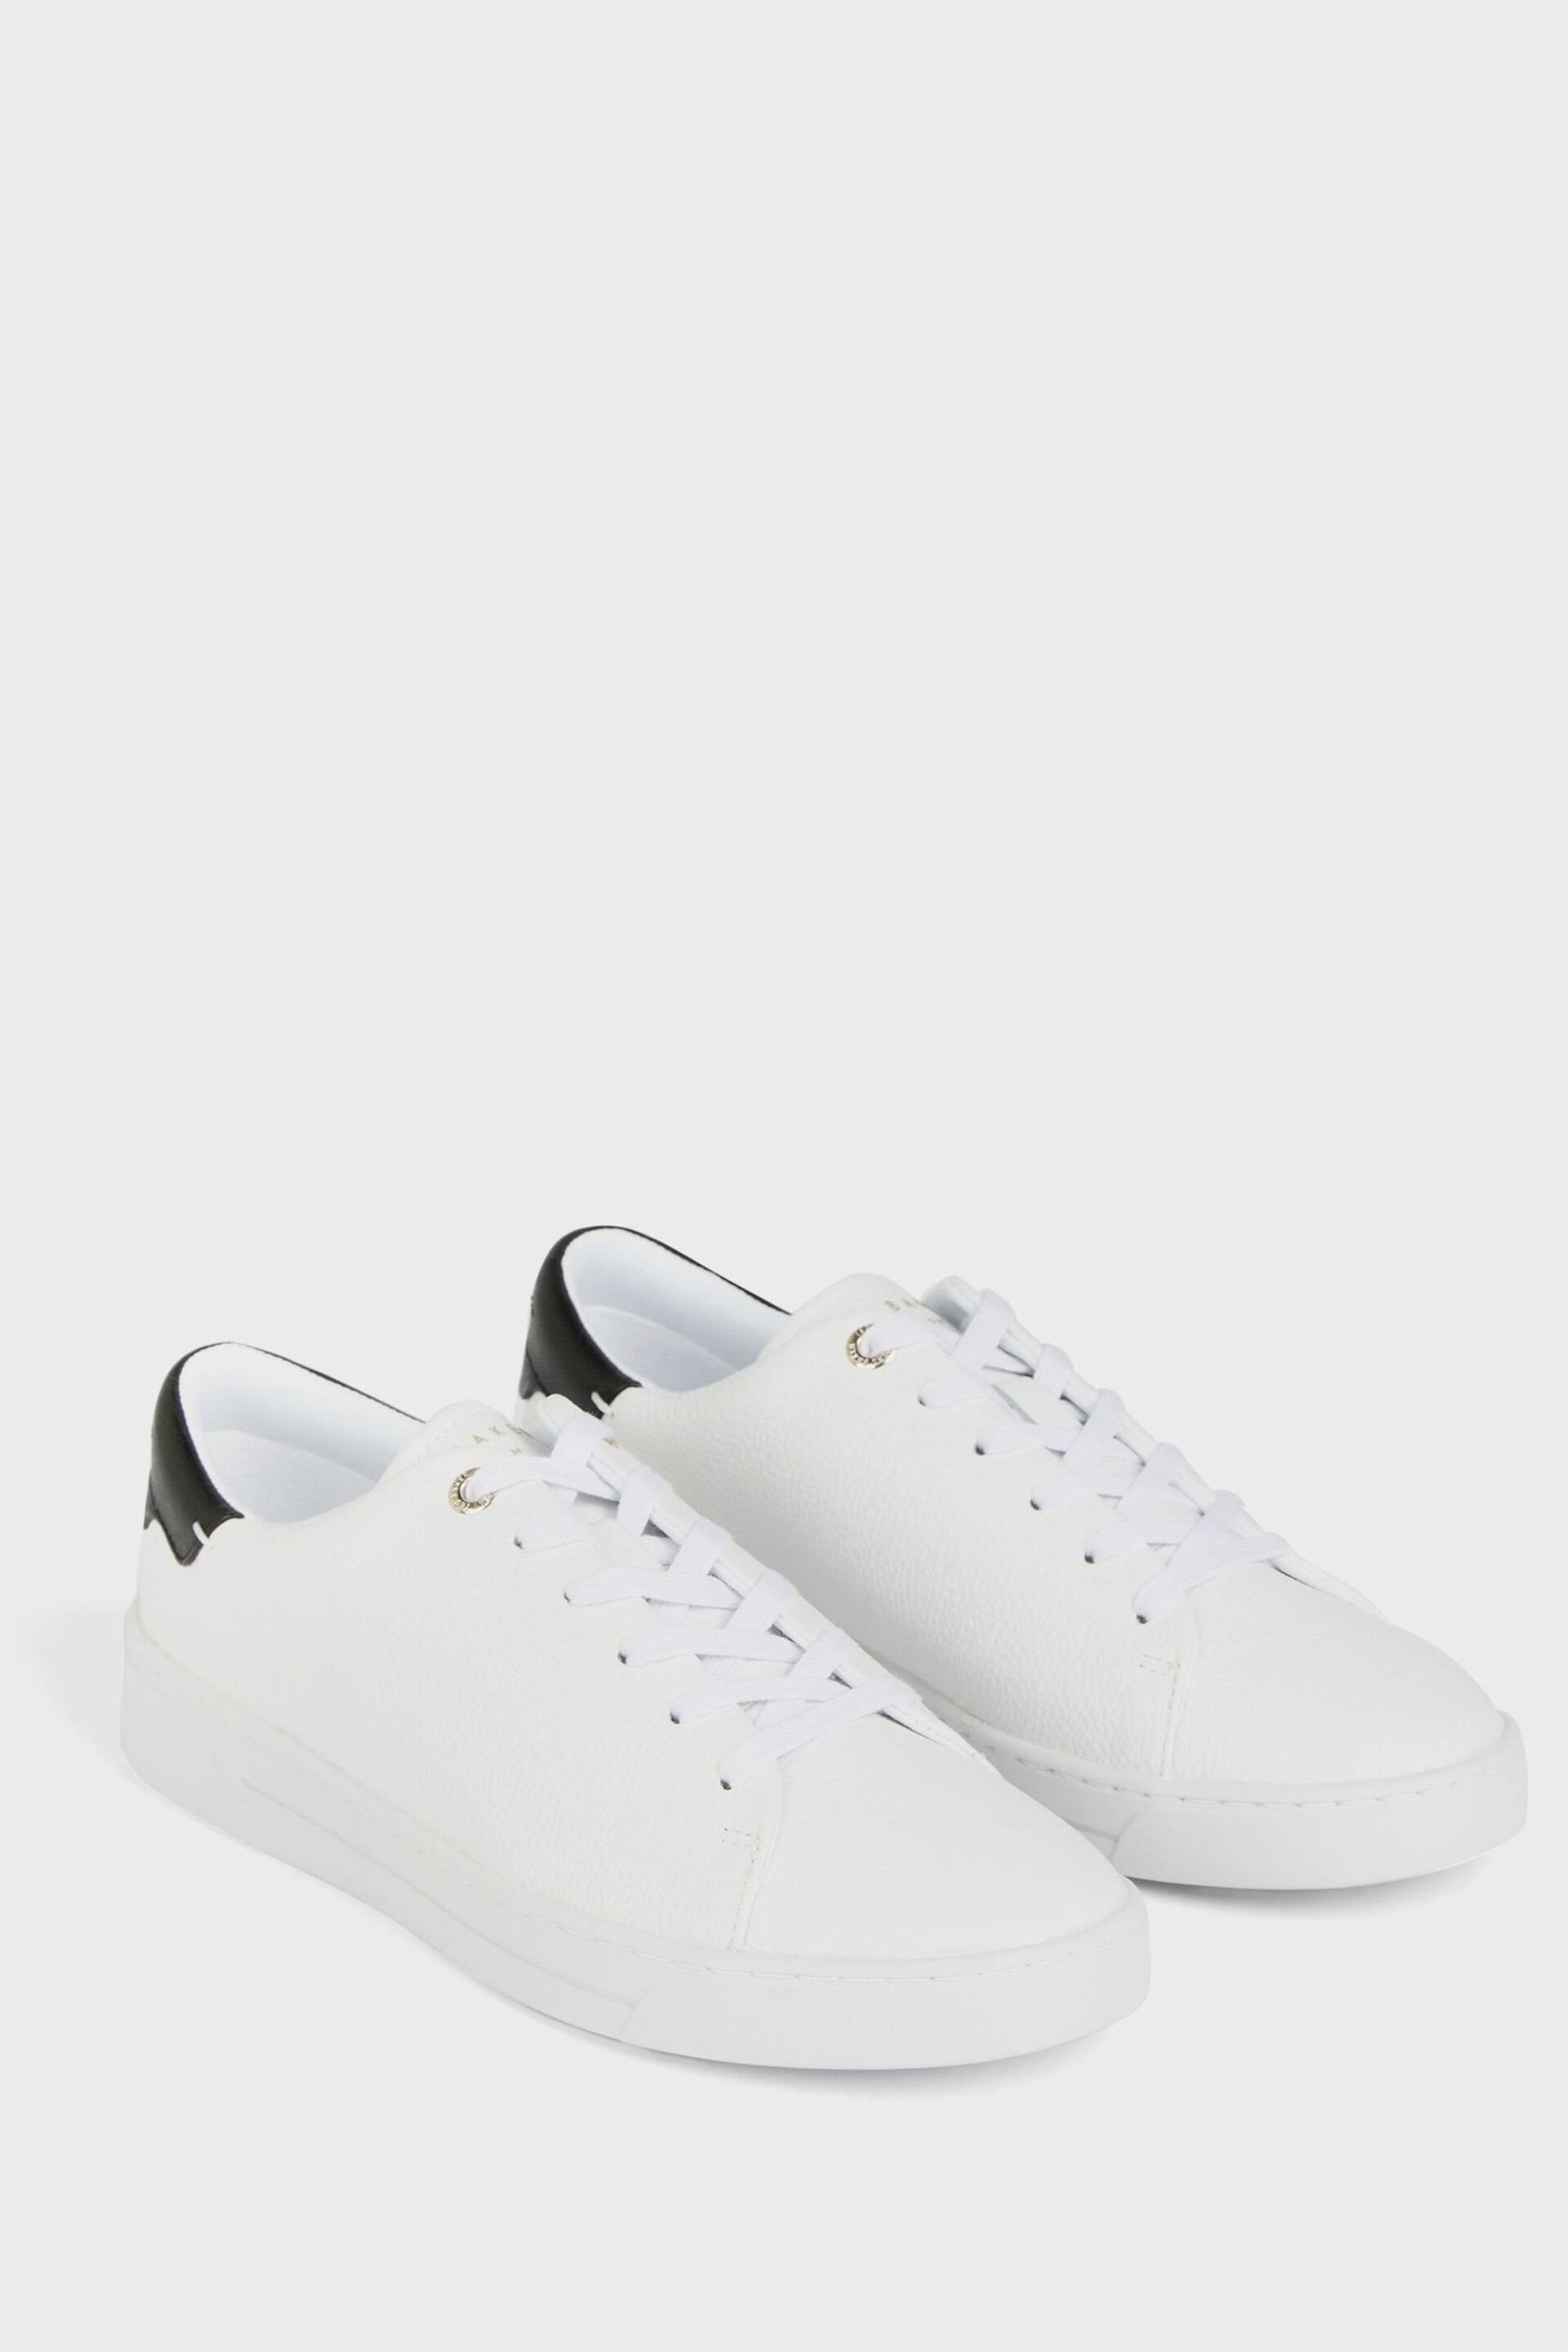 Ted Baker White Tumbled Kimmii Leather Trainers - Image 2 of 3